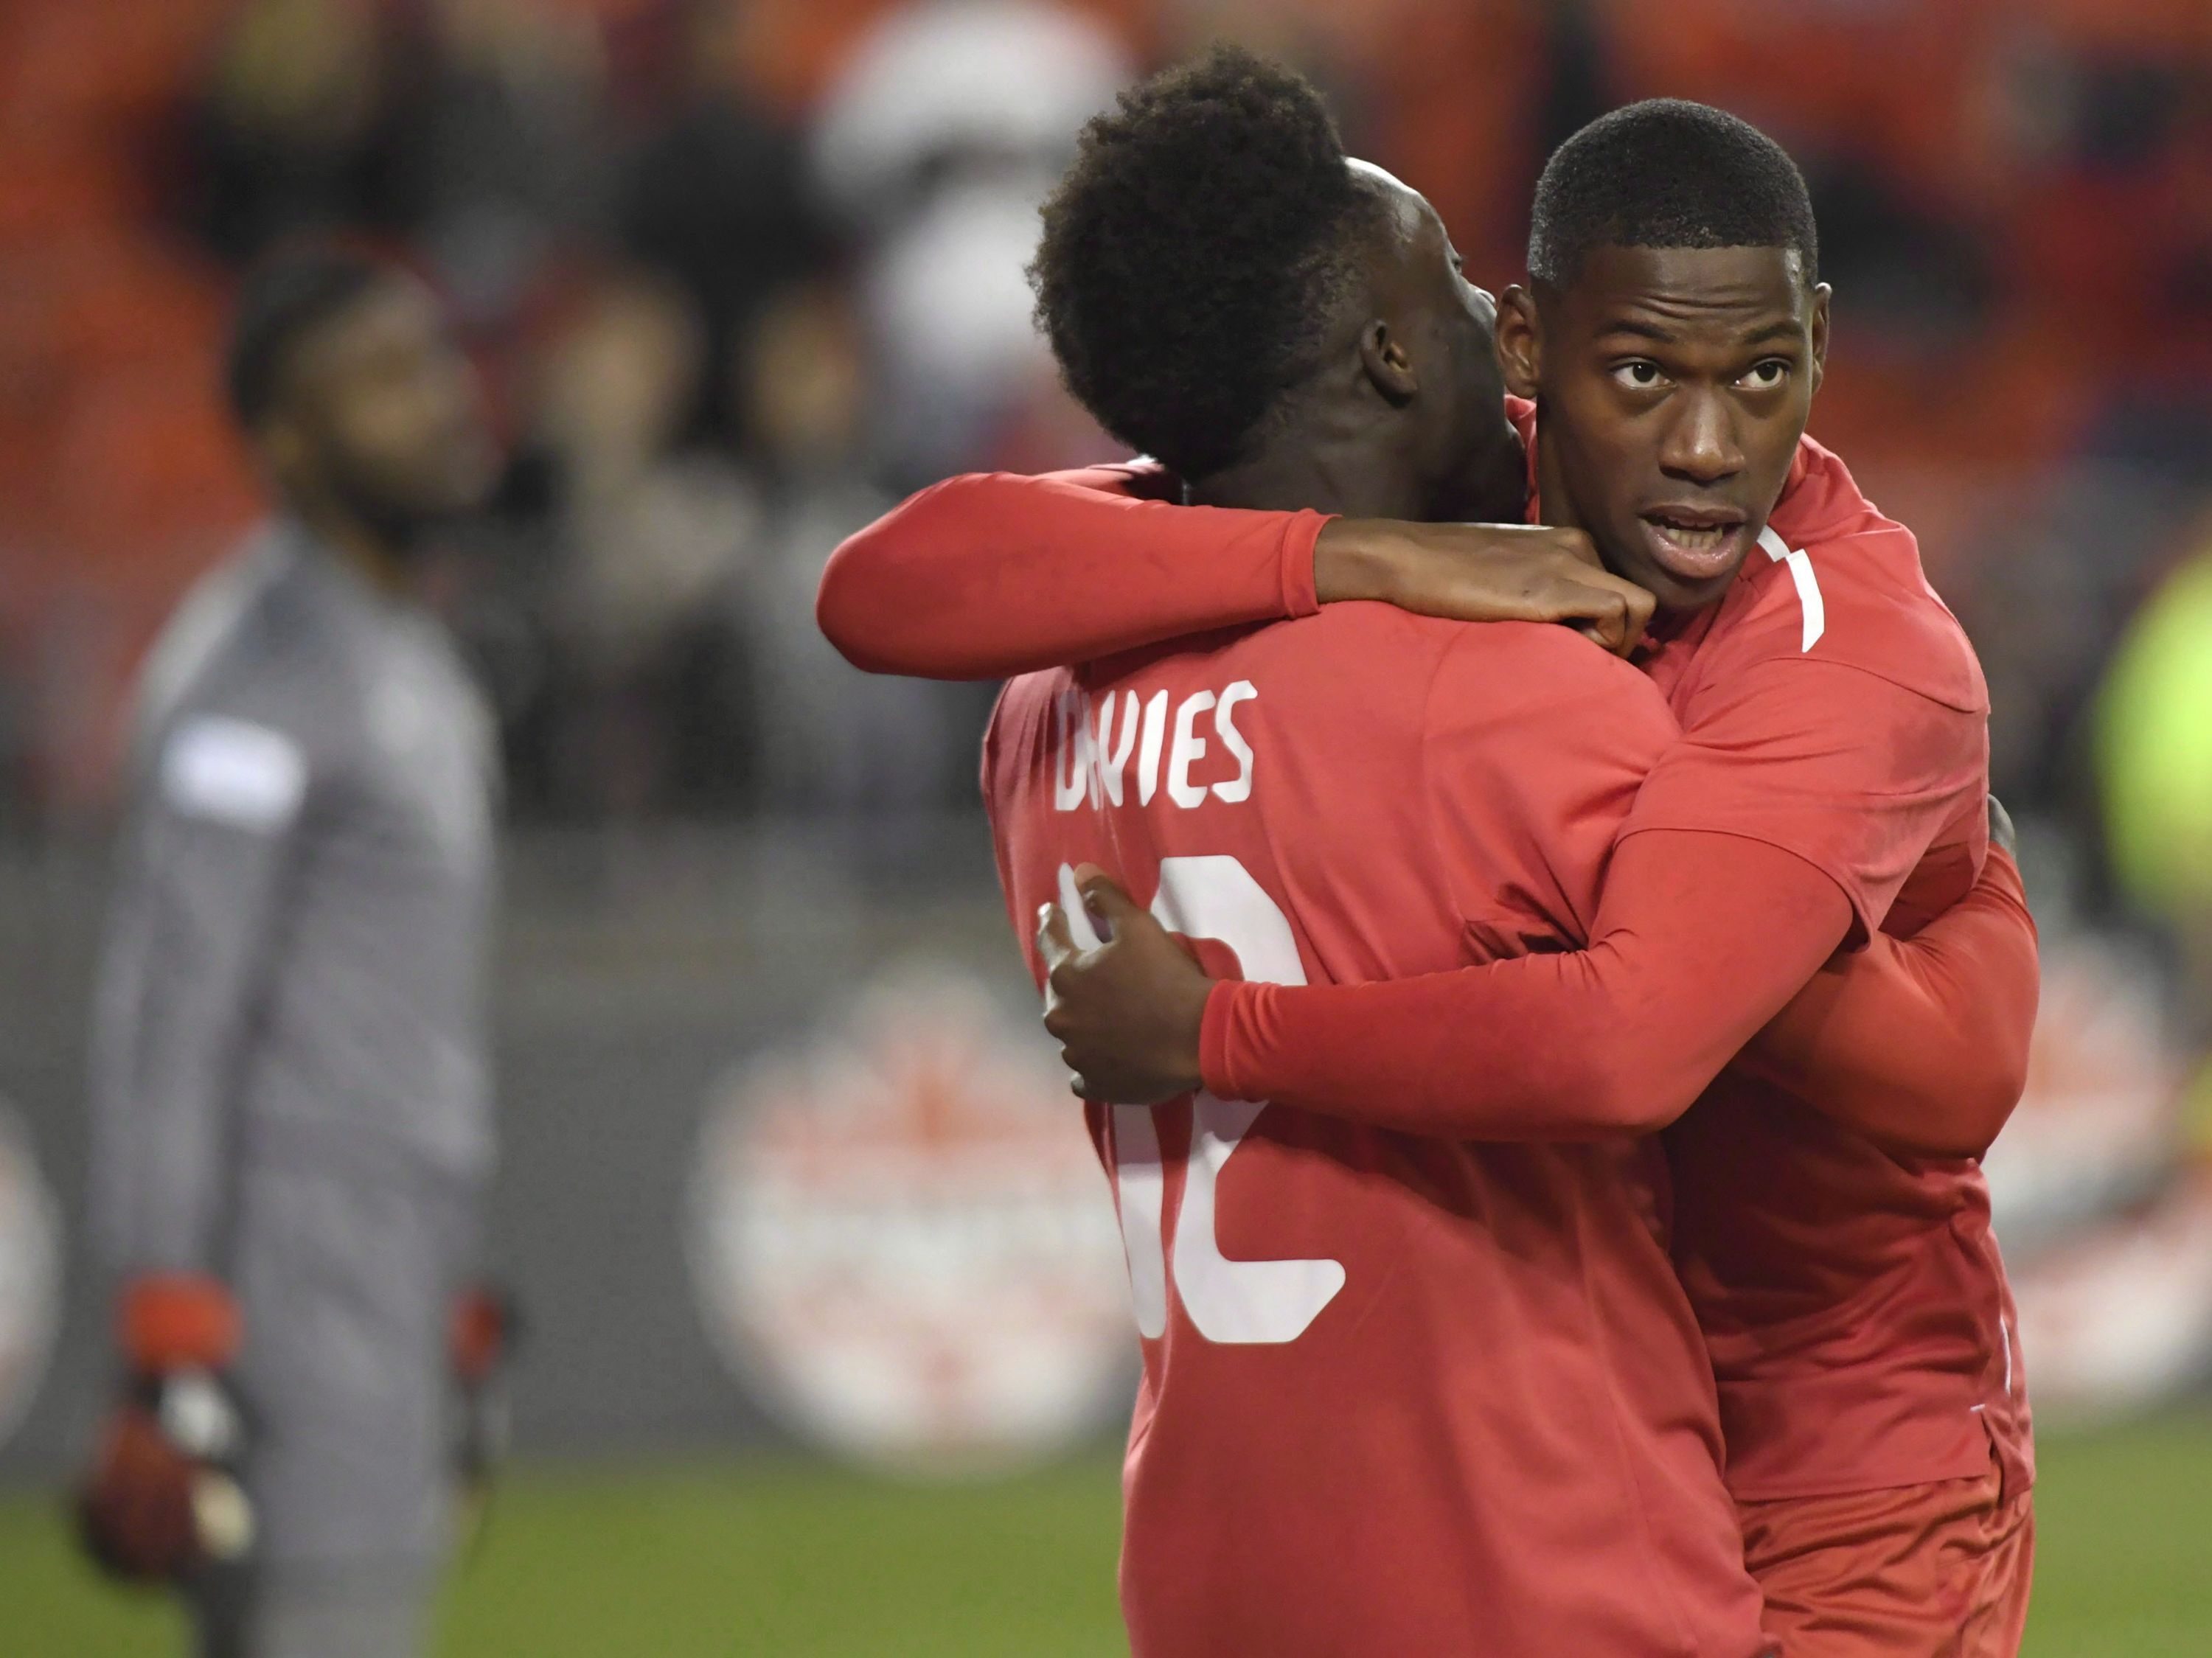 Canada: Davies celebrates scoring the nation's first World Cup goal